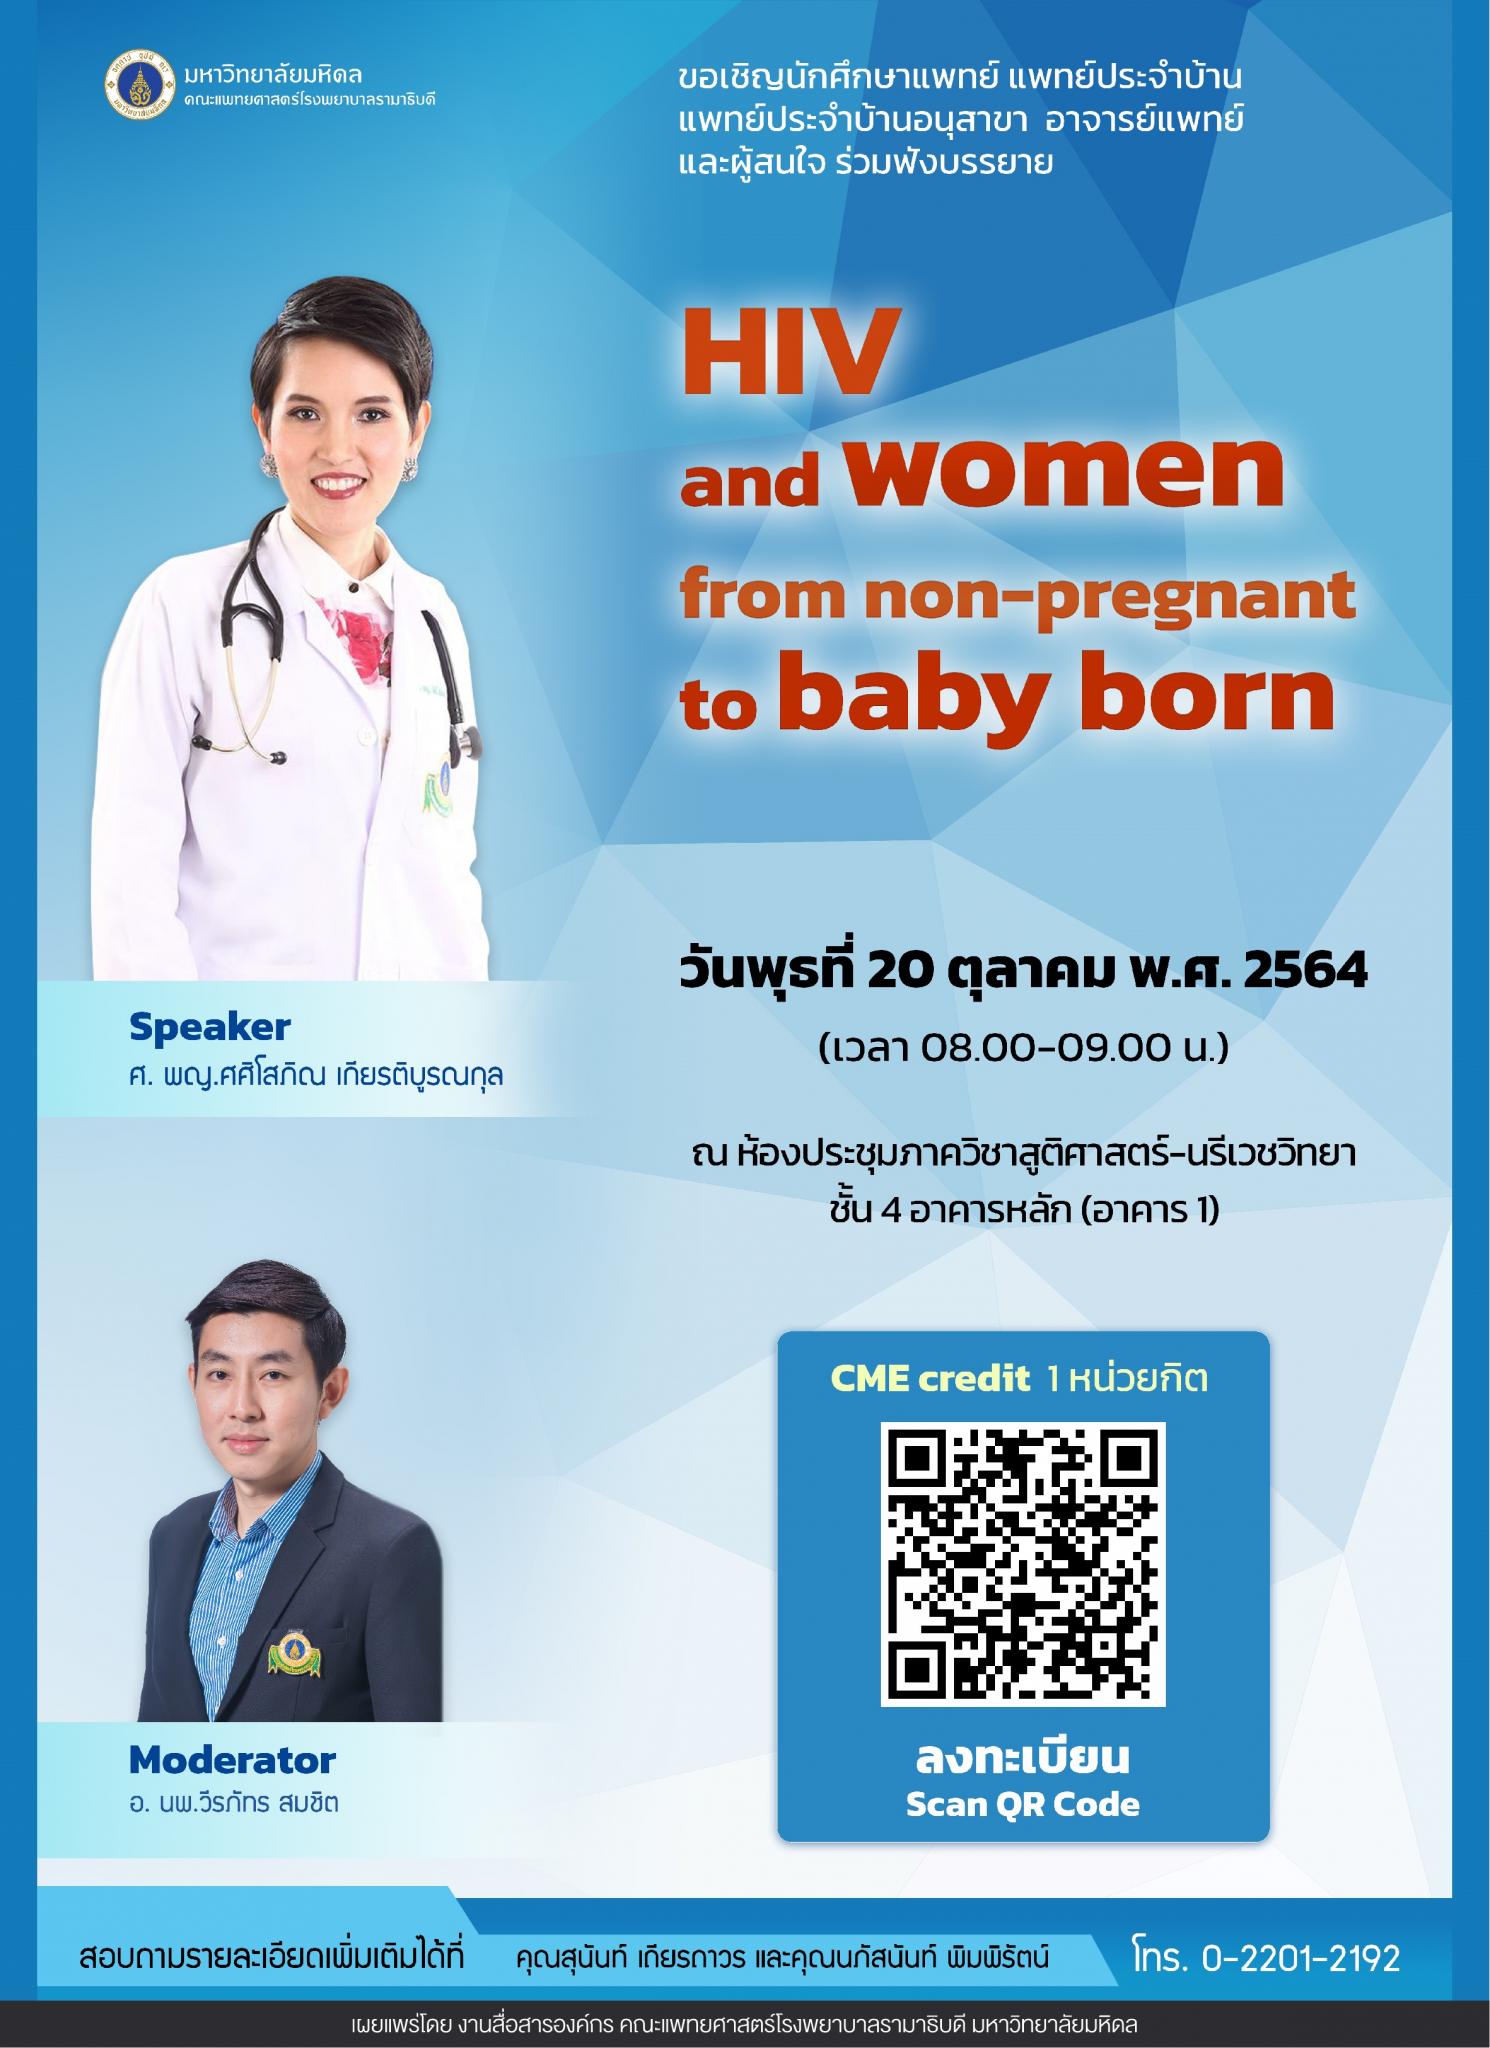 HIV and women from non-pregnant to baby born